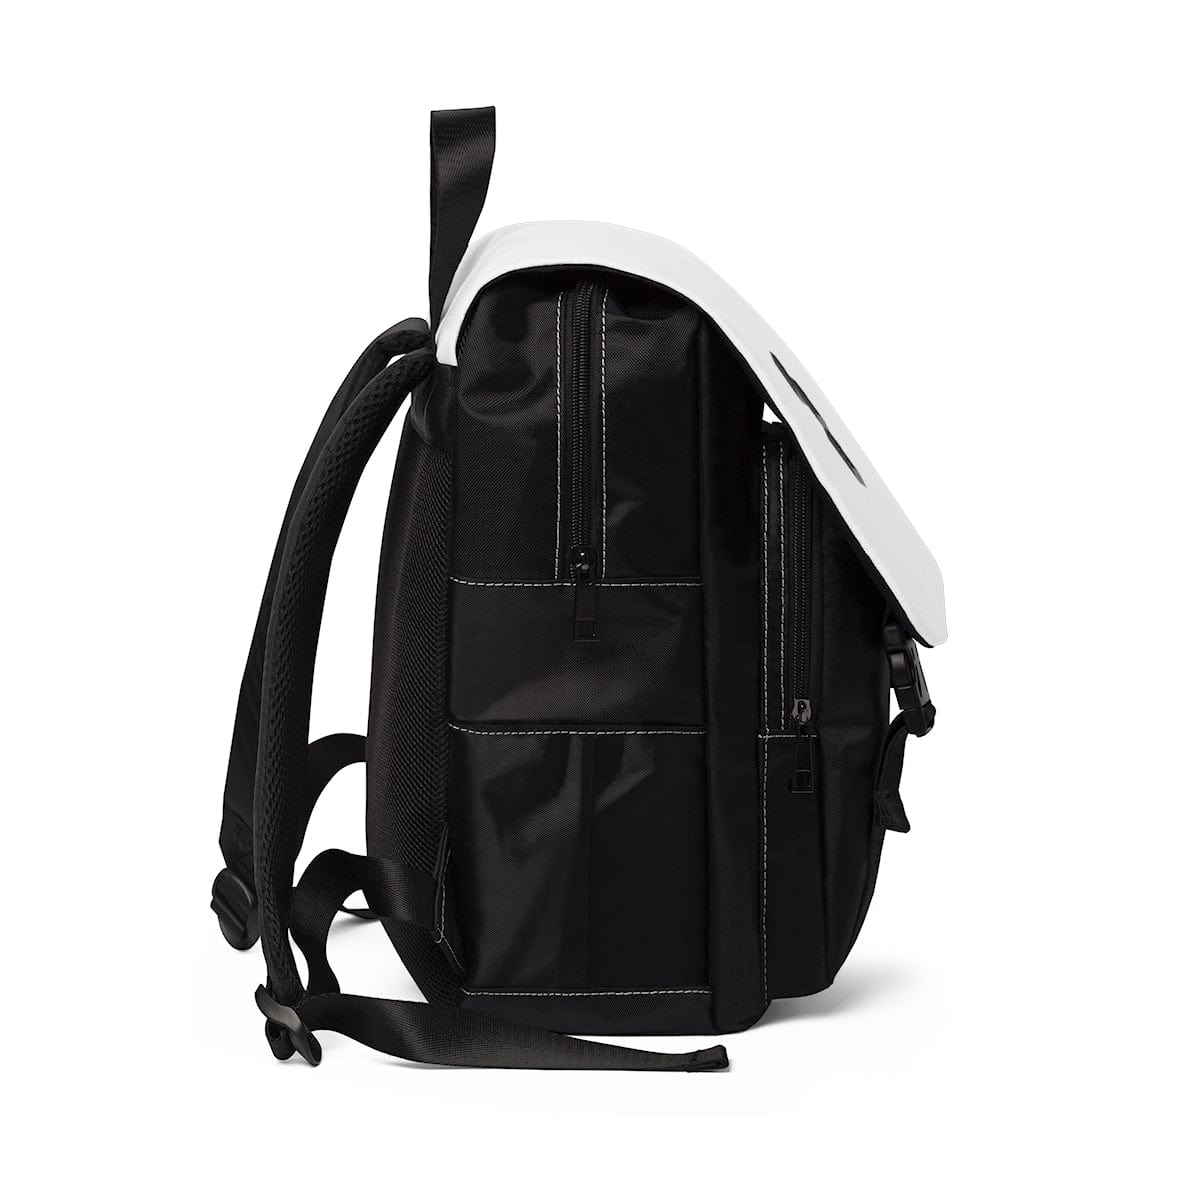 A Buyer's Guide to Ultra-Luxury Backpacks - Academy by FASHIONPHILE